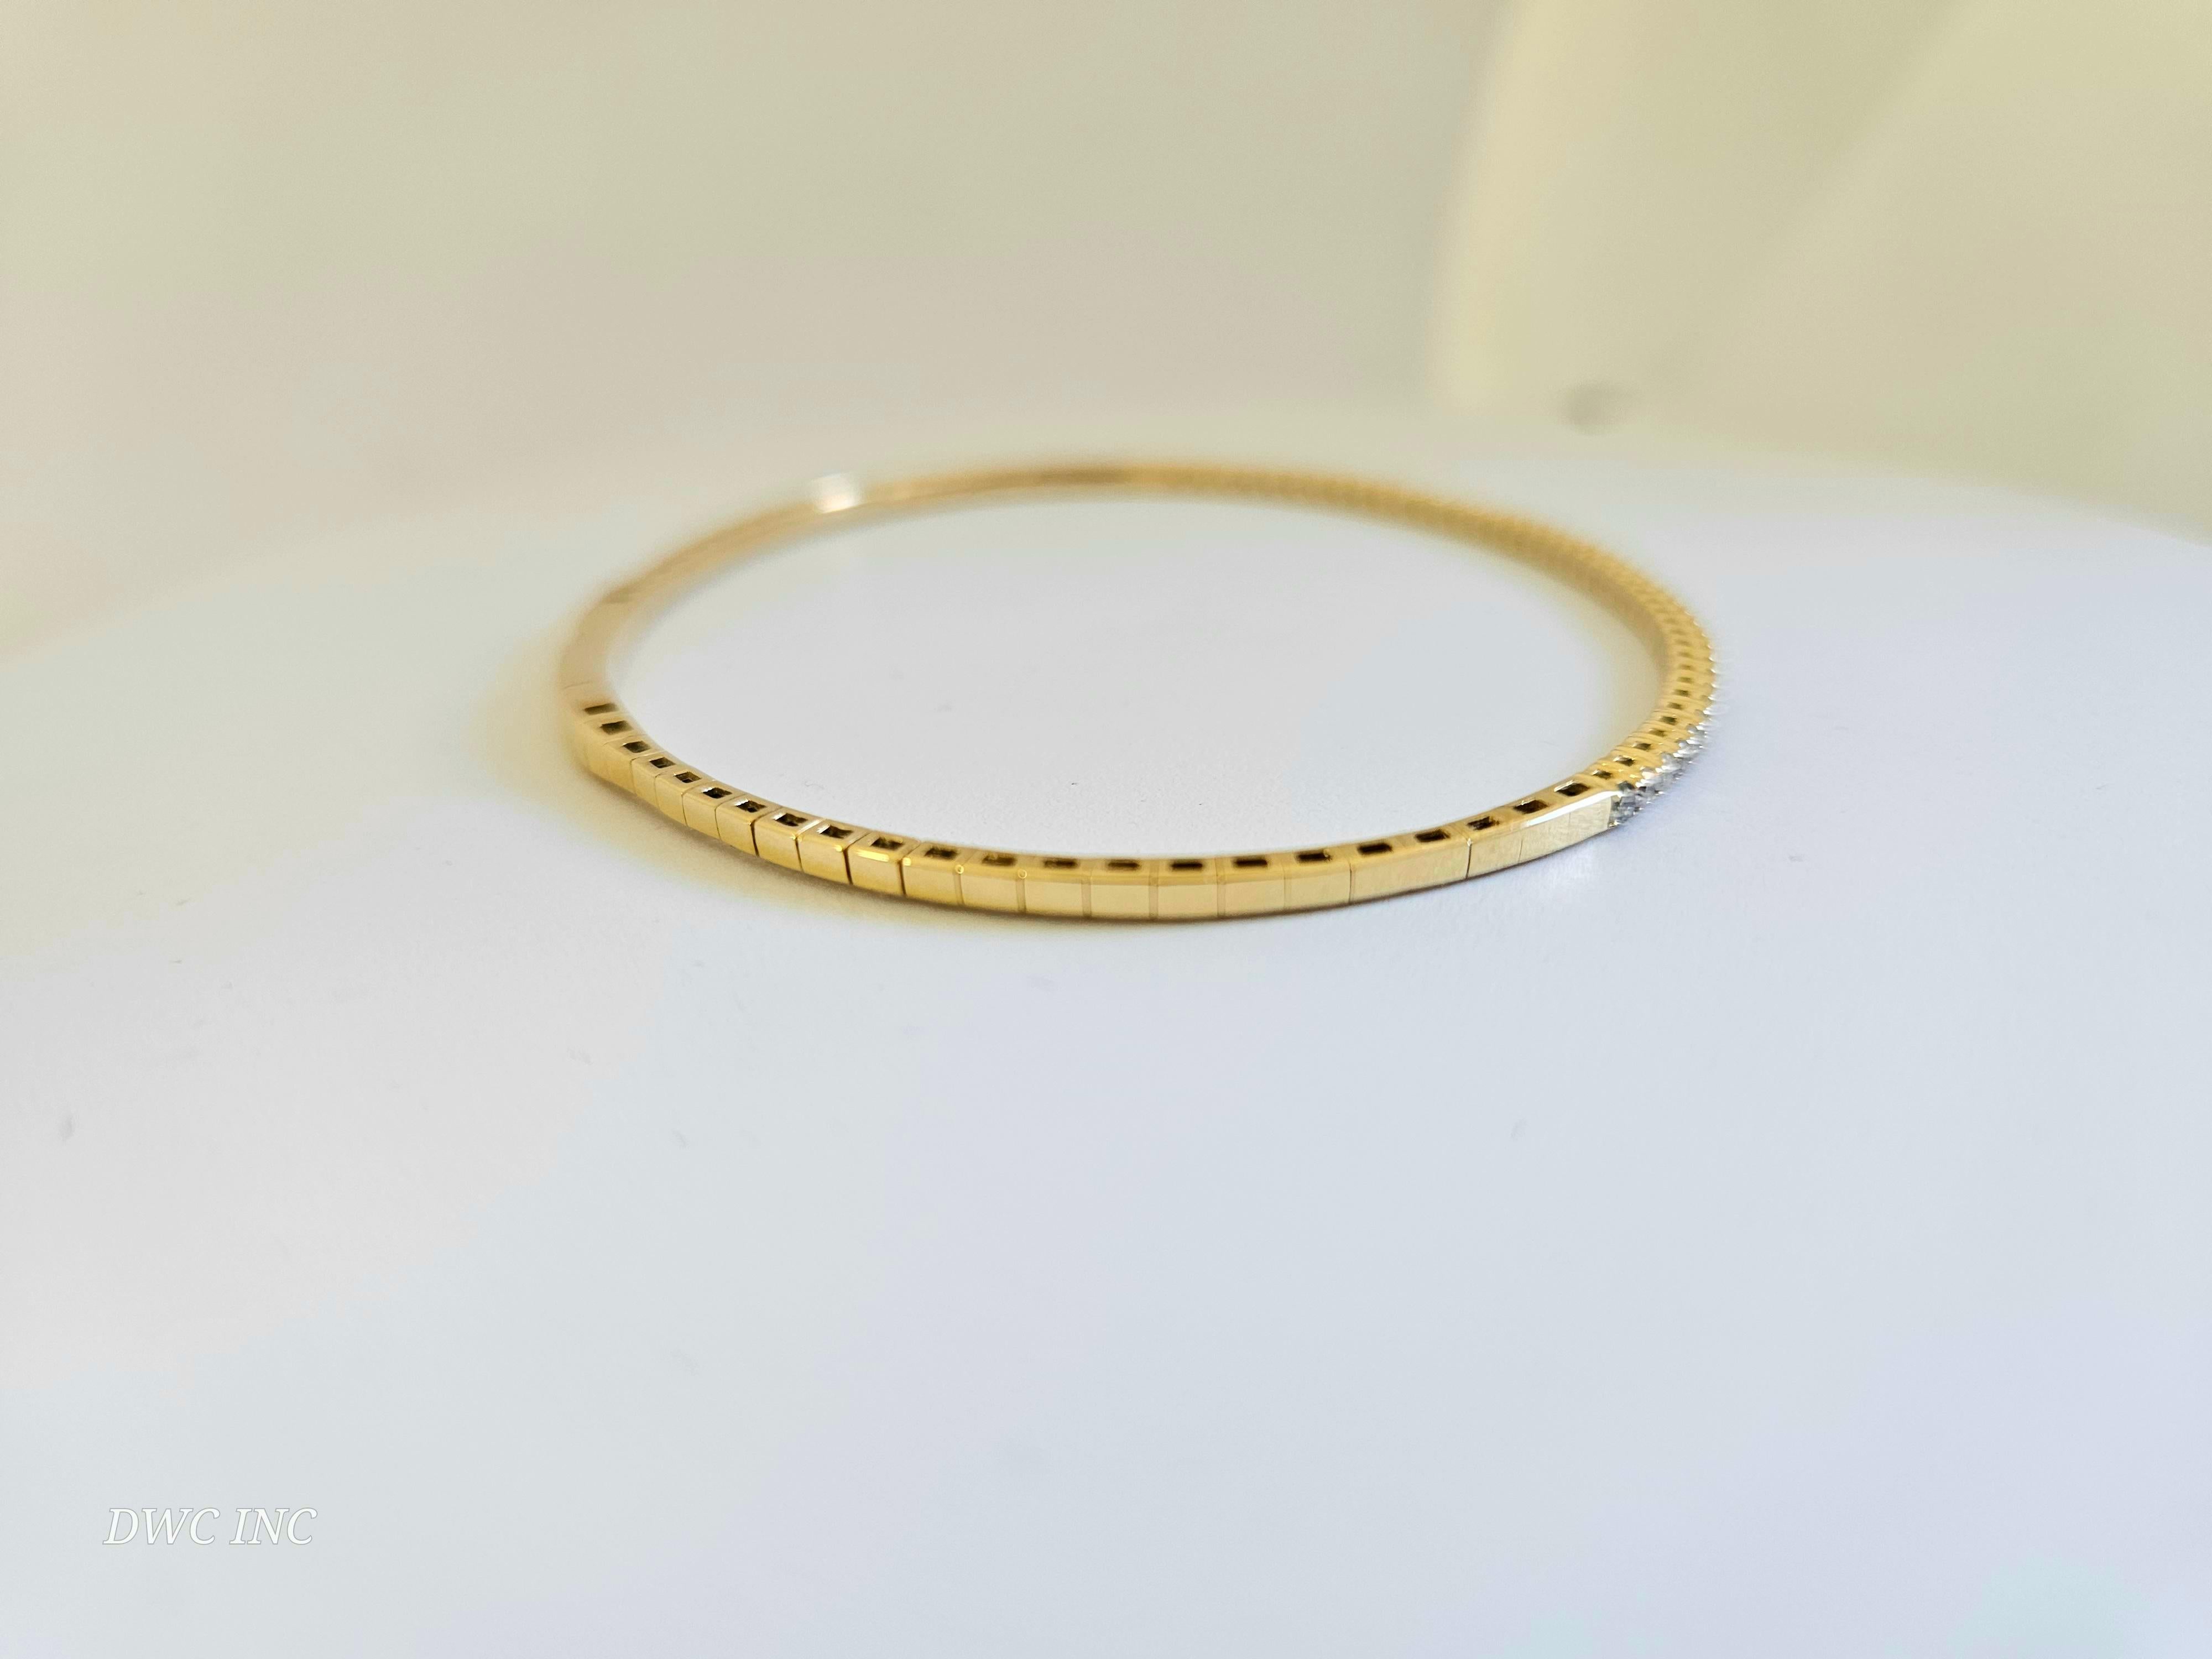 0.70 Carat Round Brilliant Cut Diamond Mini bangle Bracelet 14 Karat Yellow Gold In New Condition For Sale In Great Neck, NY